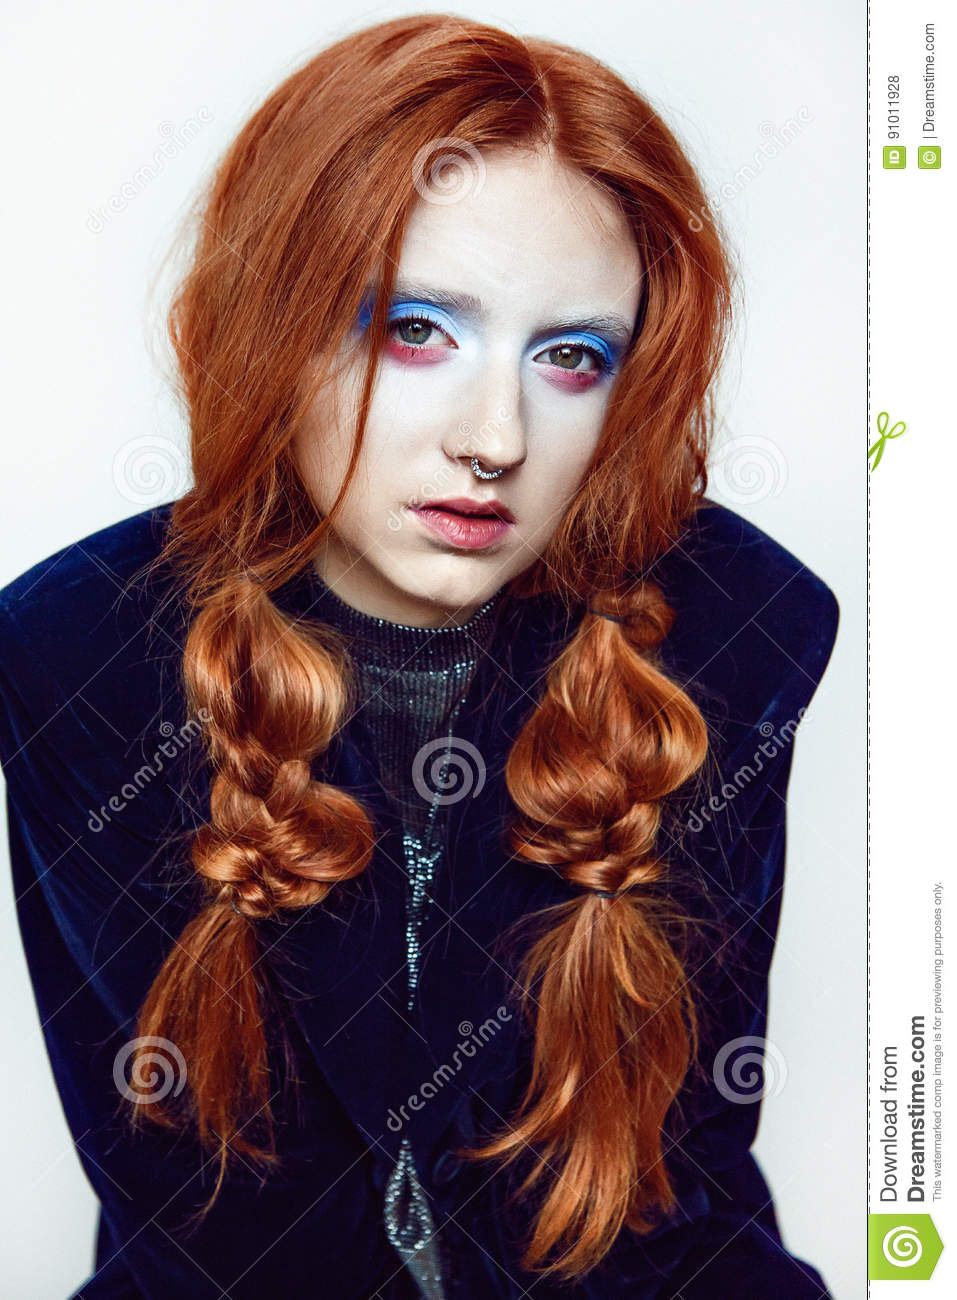 Makeup For Red Hair And Brown Eyes Ginger Hair Beauty Clownish Makeup Stock Photo Image Of Model